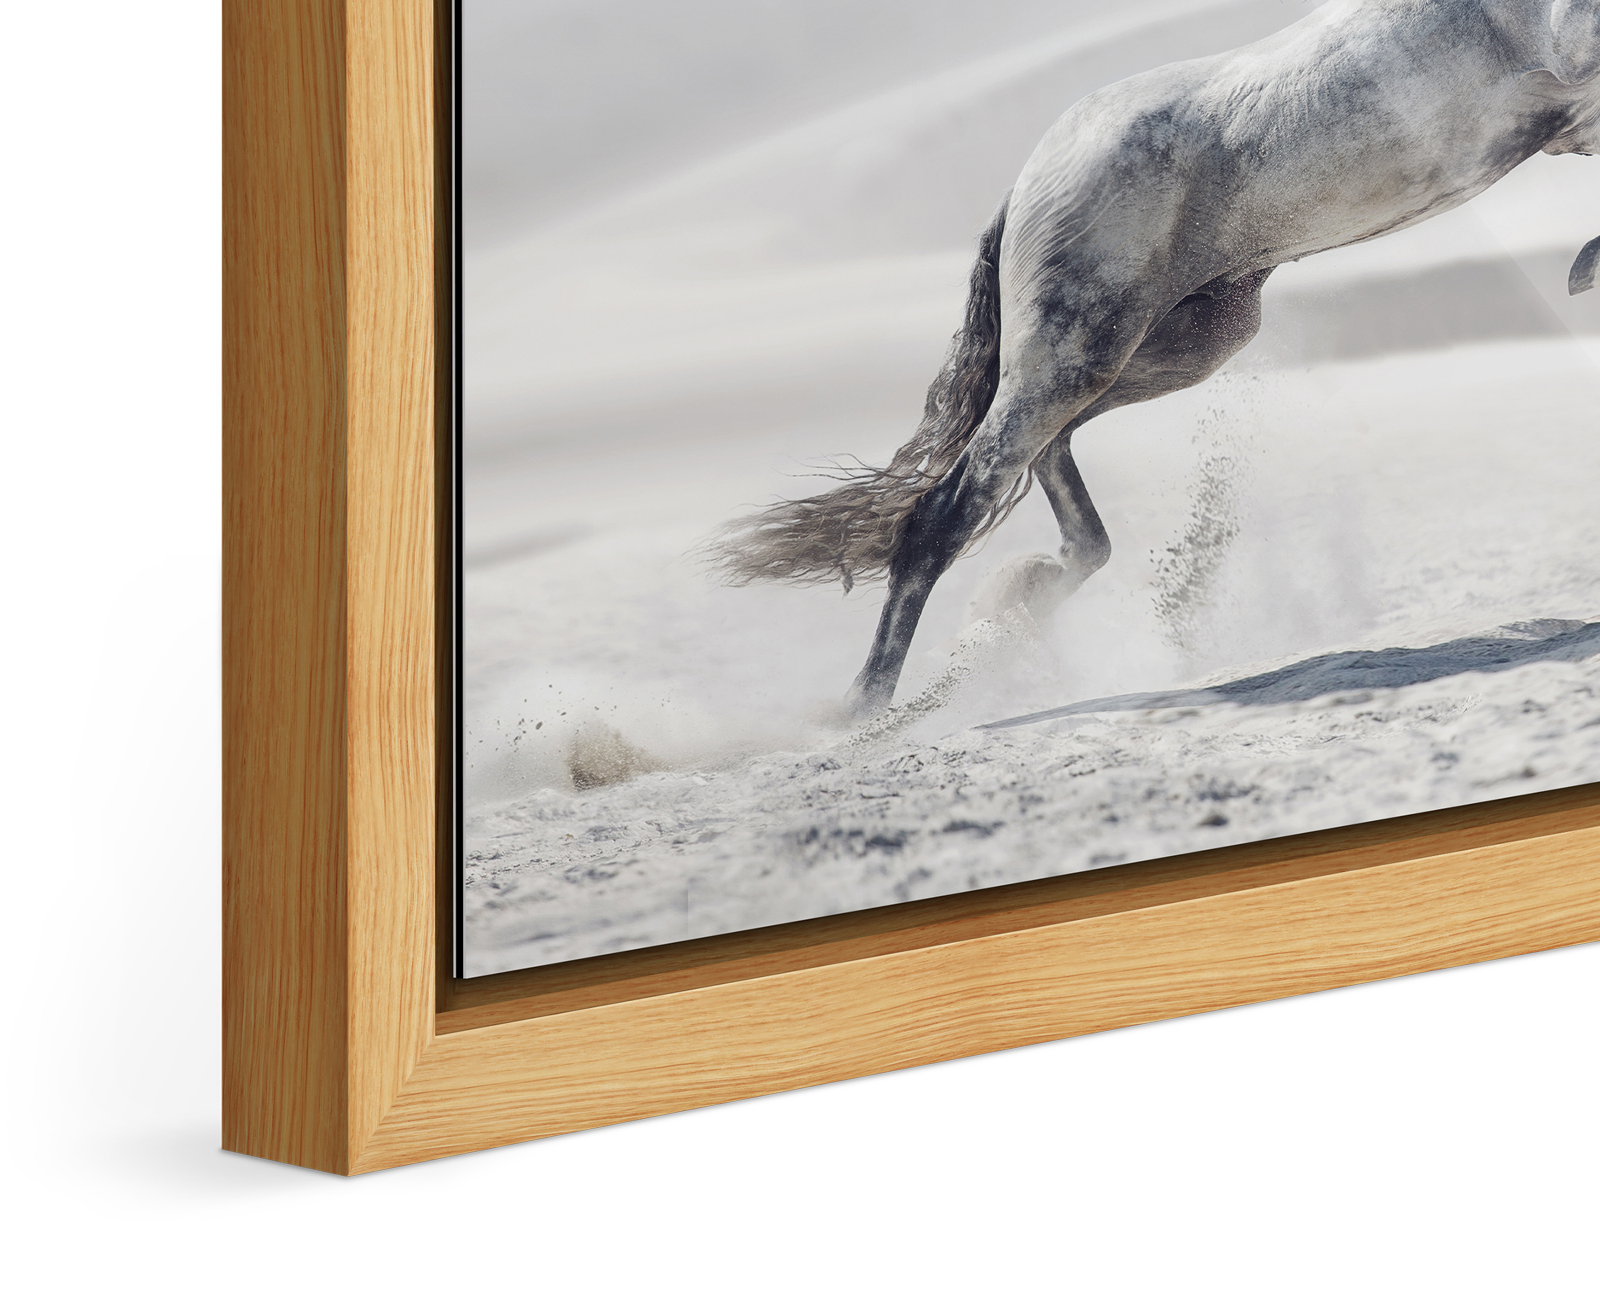 Close up of the image of a white horse jumping in a desert landscape framed in a Floater Frame.